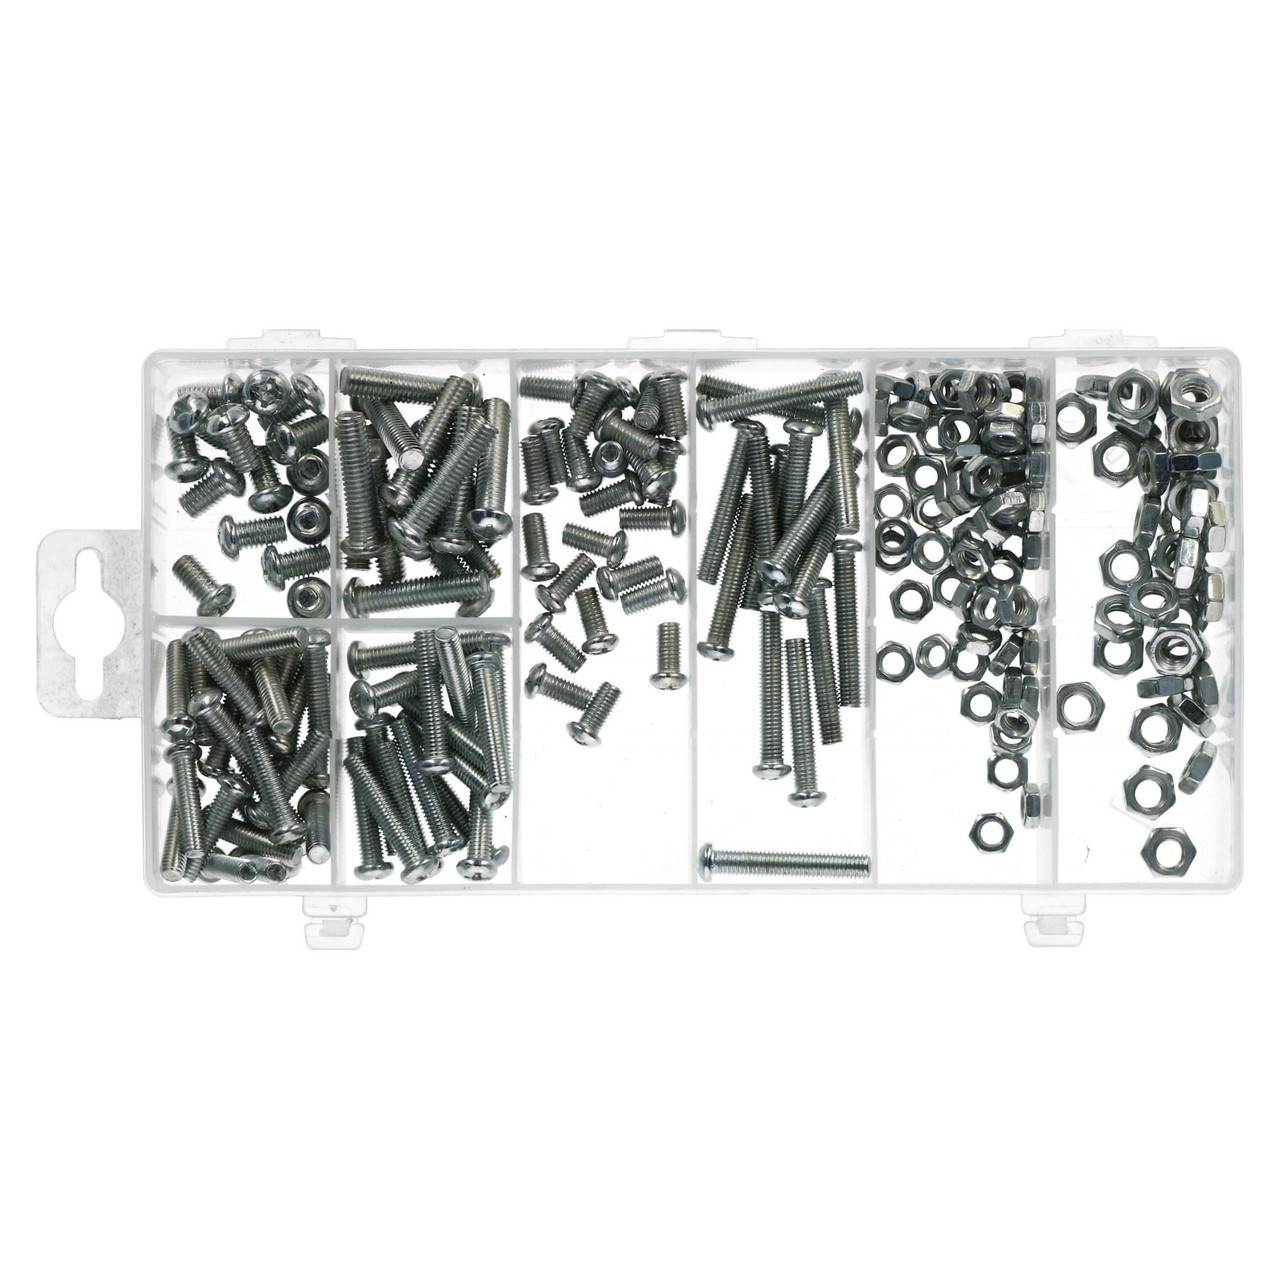 100pc Nut And Bolt Set 6mm Thread (M6 x 1.0) Various Length 30-100mm Bolts - 5